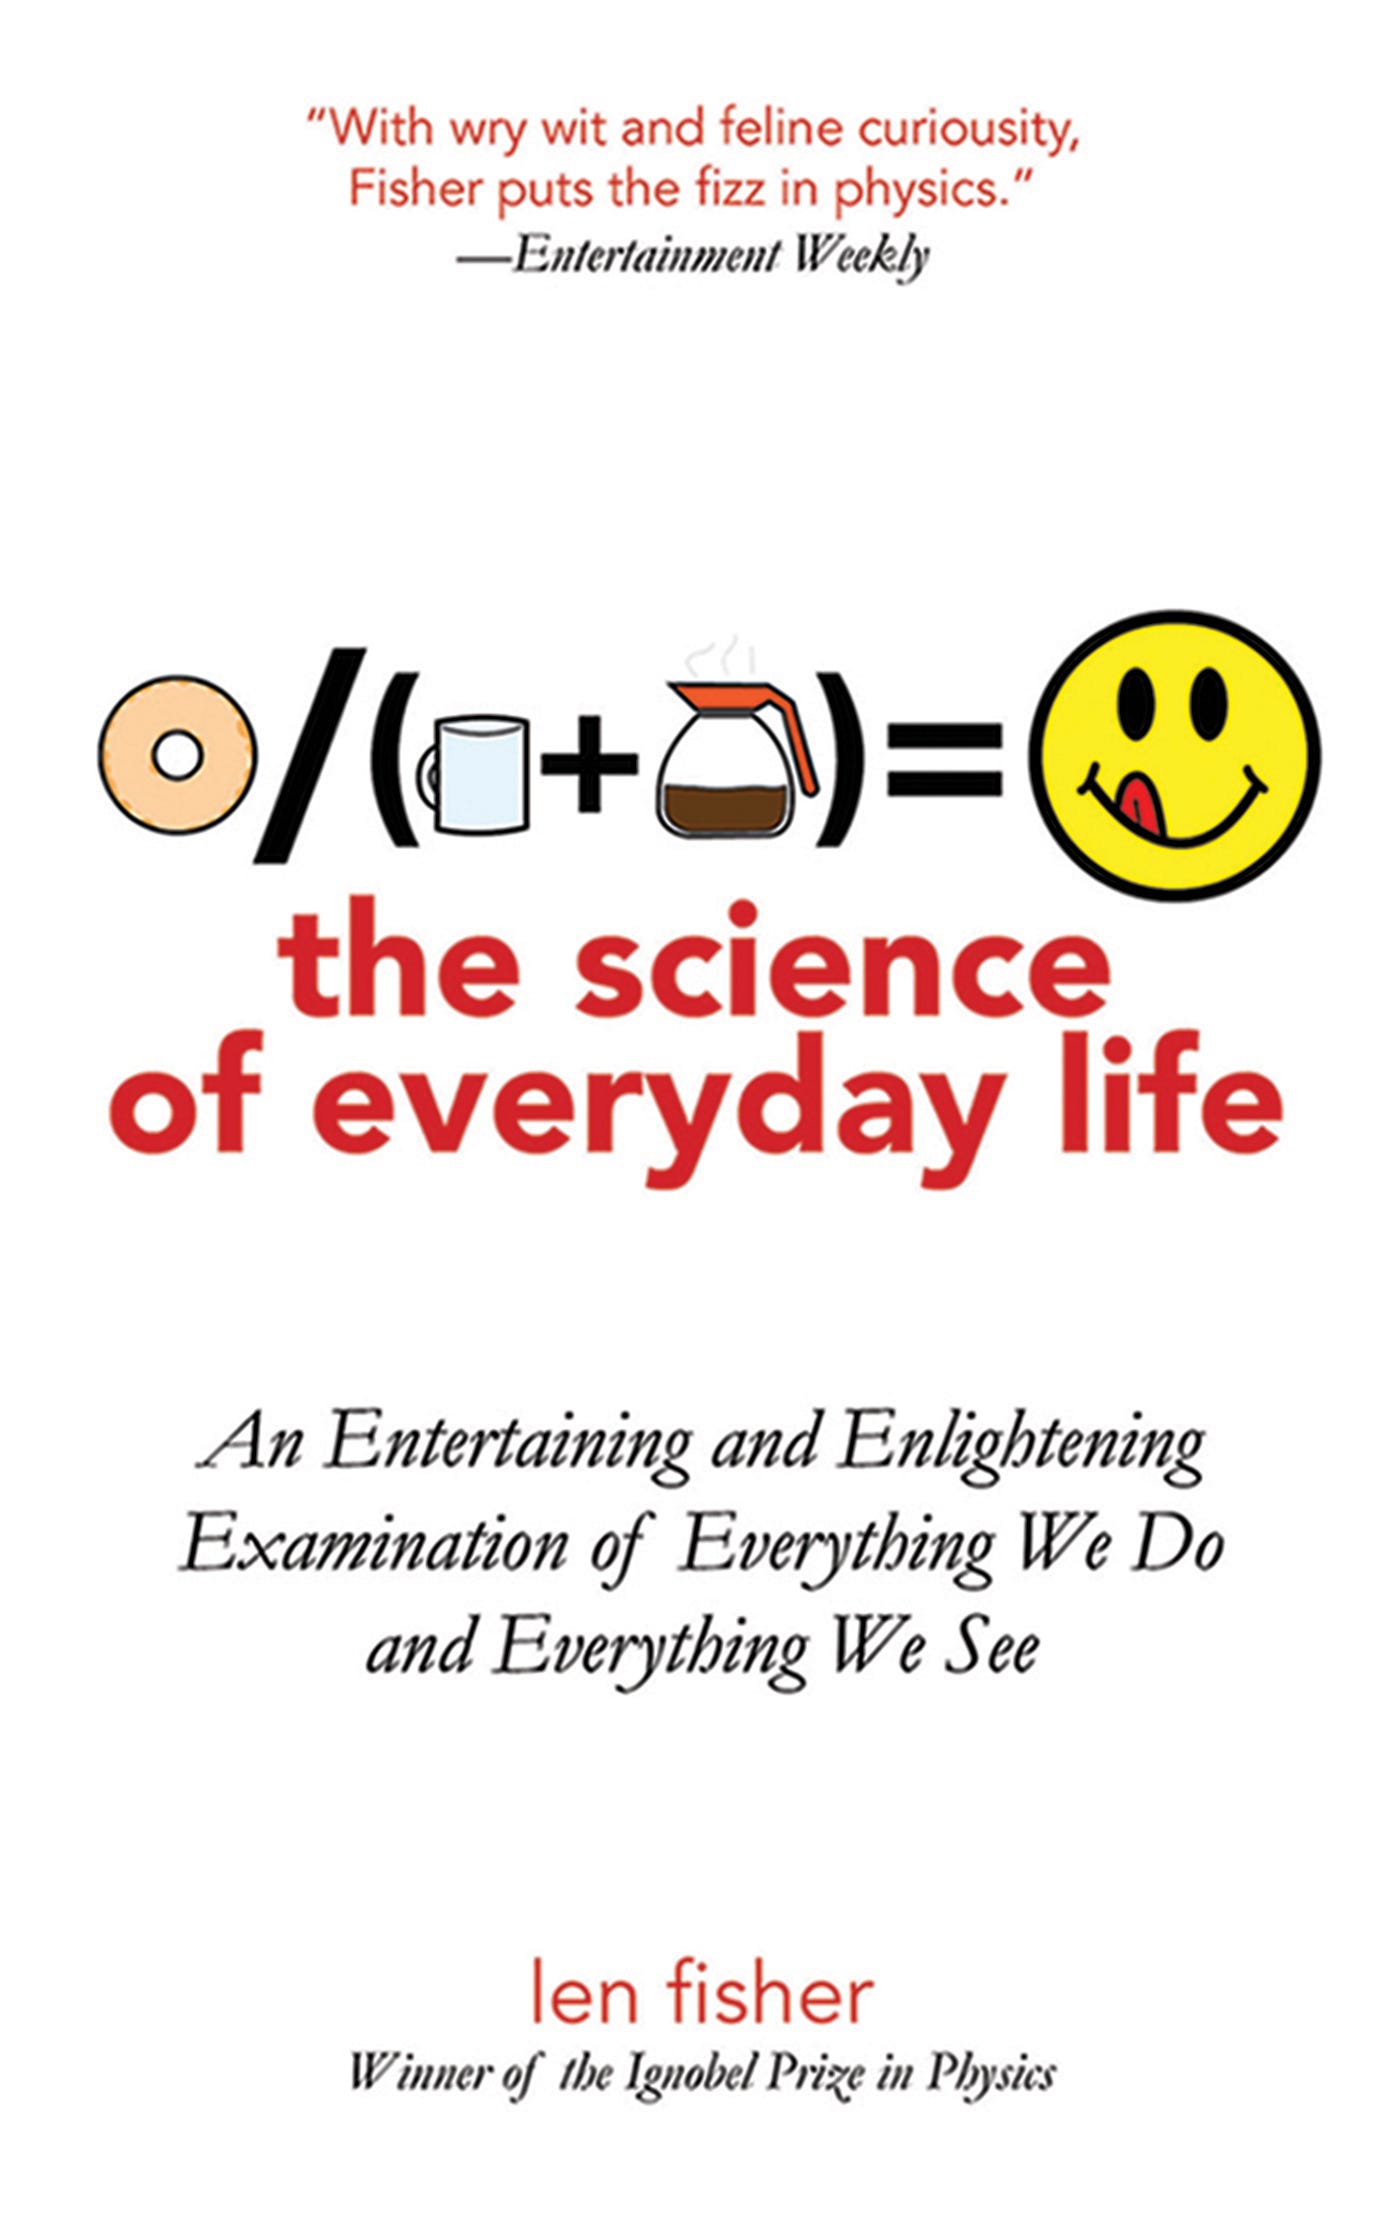 The Science of Everyday Life by Len Fisher — Review | by  𝐆𝐫𝐫𝐥𝐒𝐜𝐢𝐞𝐧𝐭𝐢𝐬𝐭, scientist & journalist | Medium